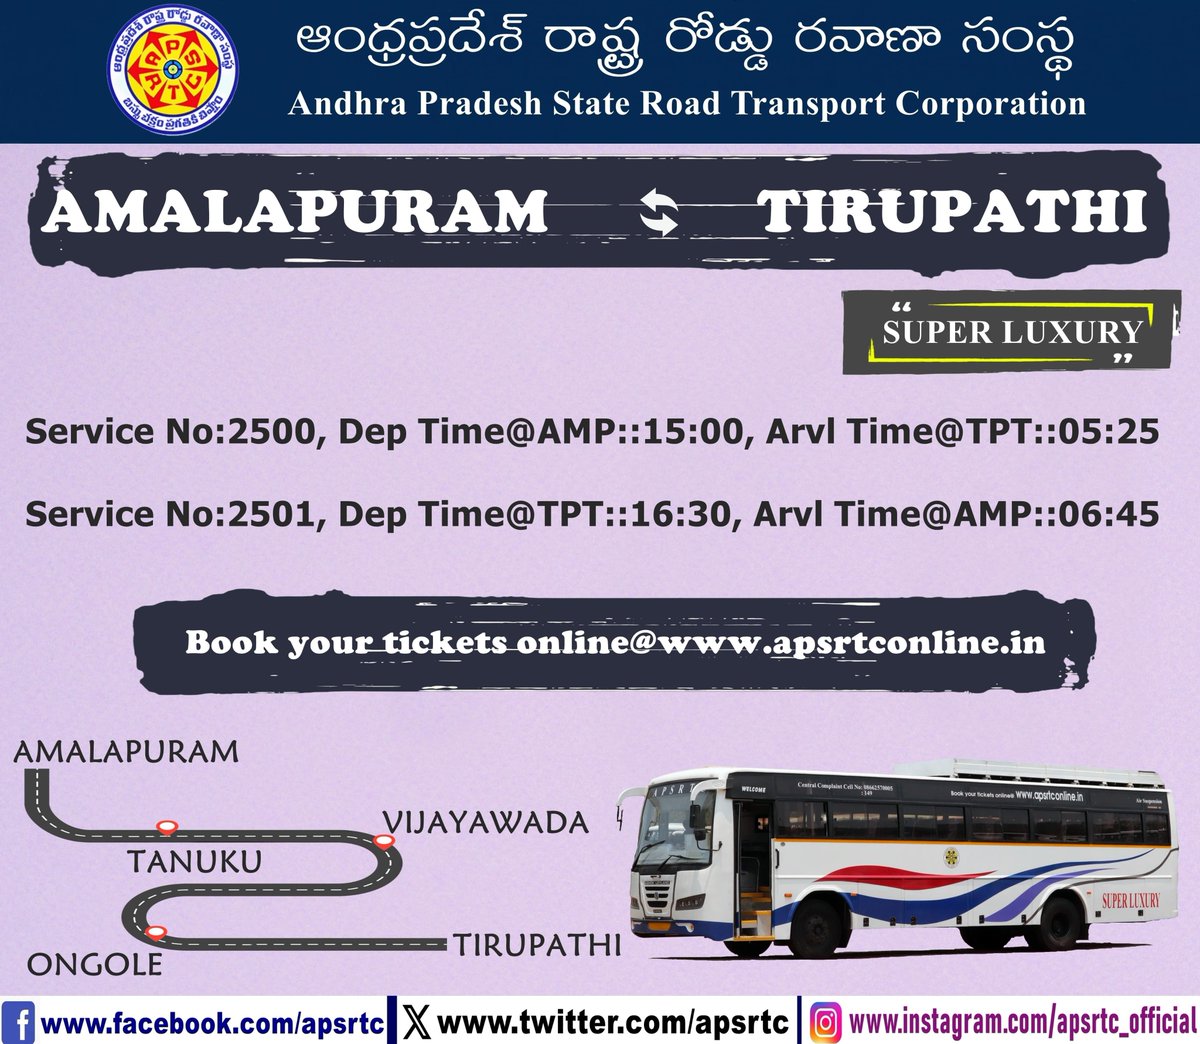 APSRTC is Operating Super Luxury Services for AMALAPURAM - TIRUPATHI For Bookings Please Visit apsrtconline.in